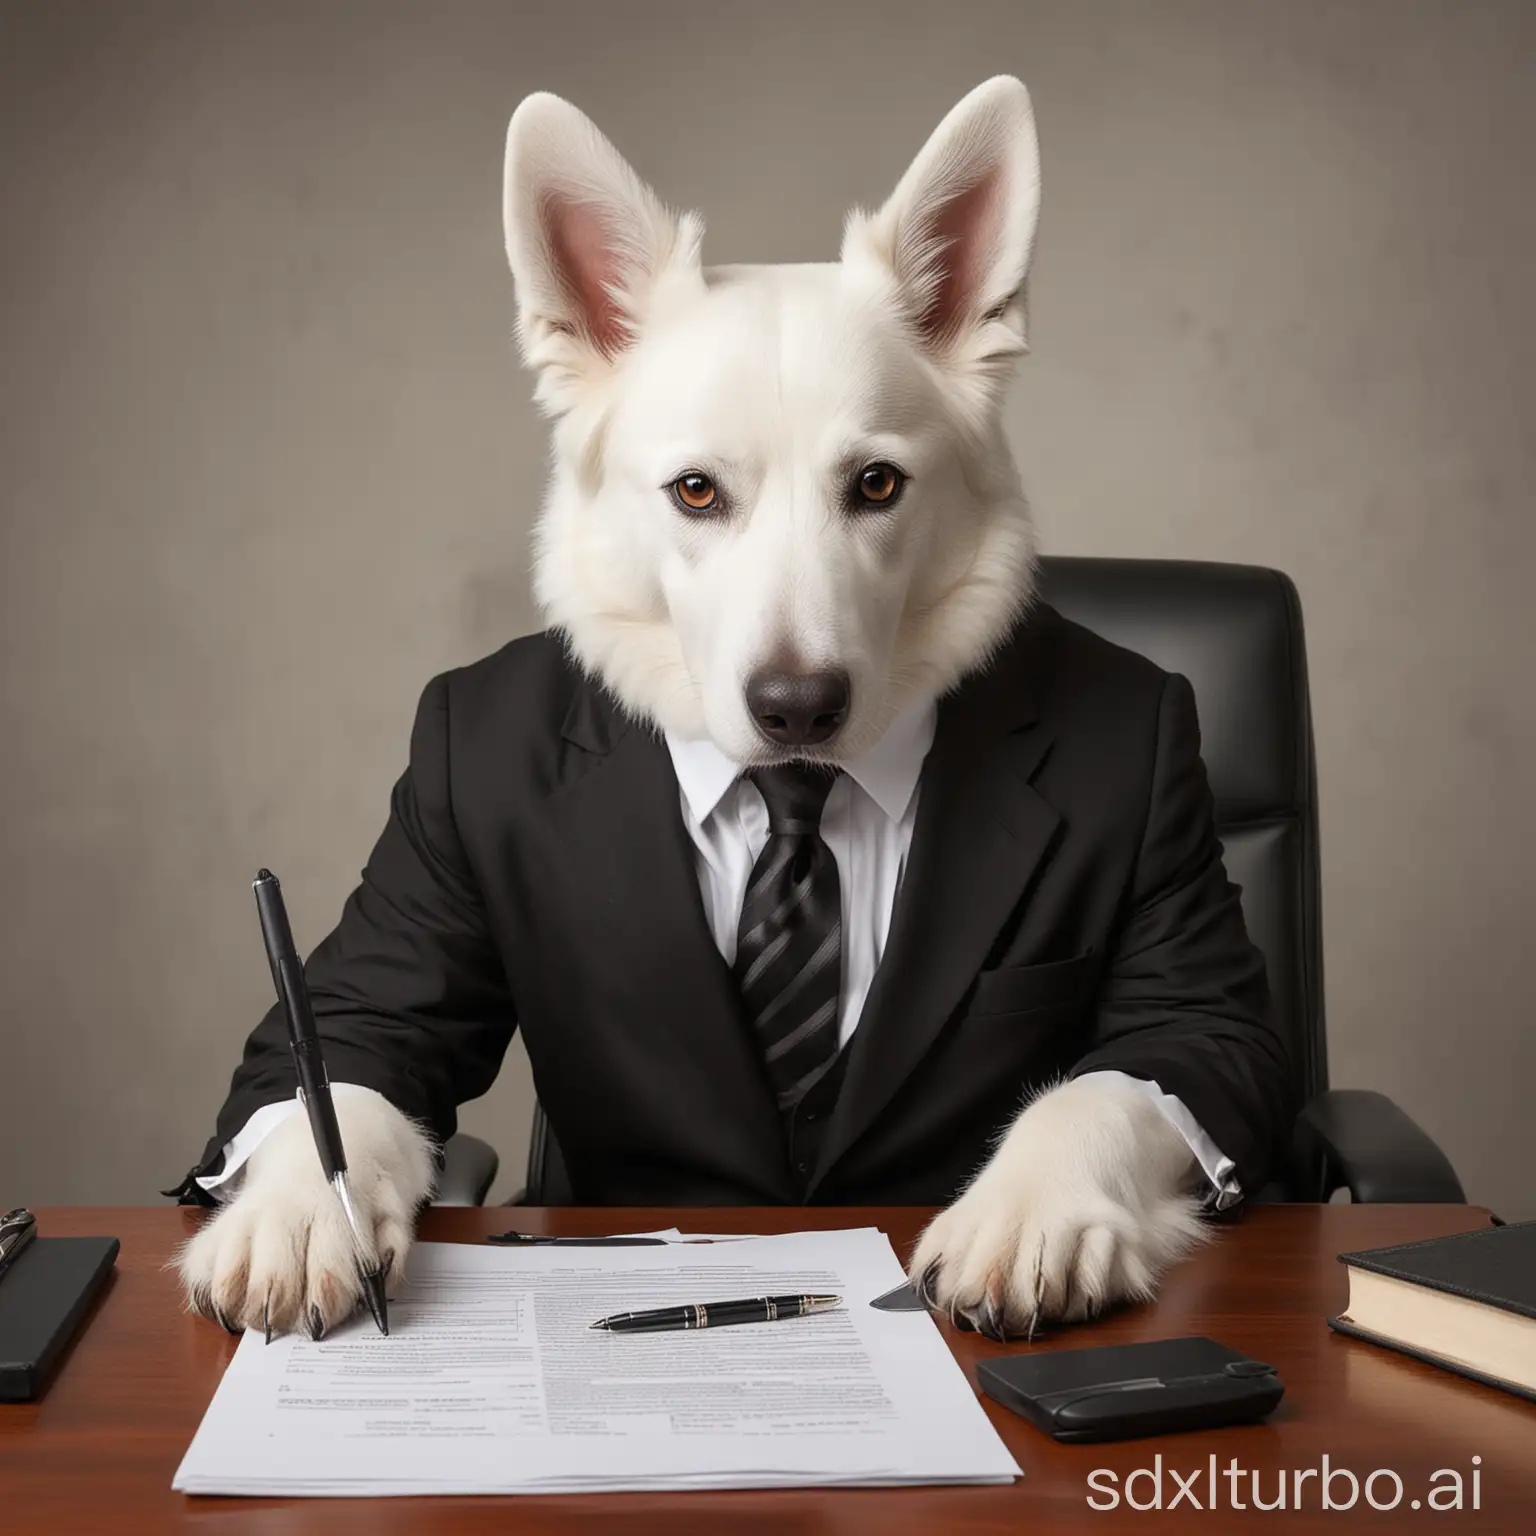 White-Swiss-Shepherd-Dog-Director-Signing-Documents-in-Suit-and-Tie